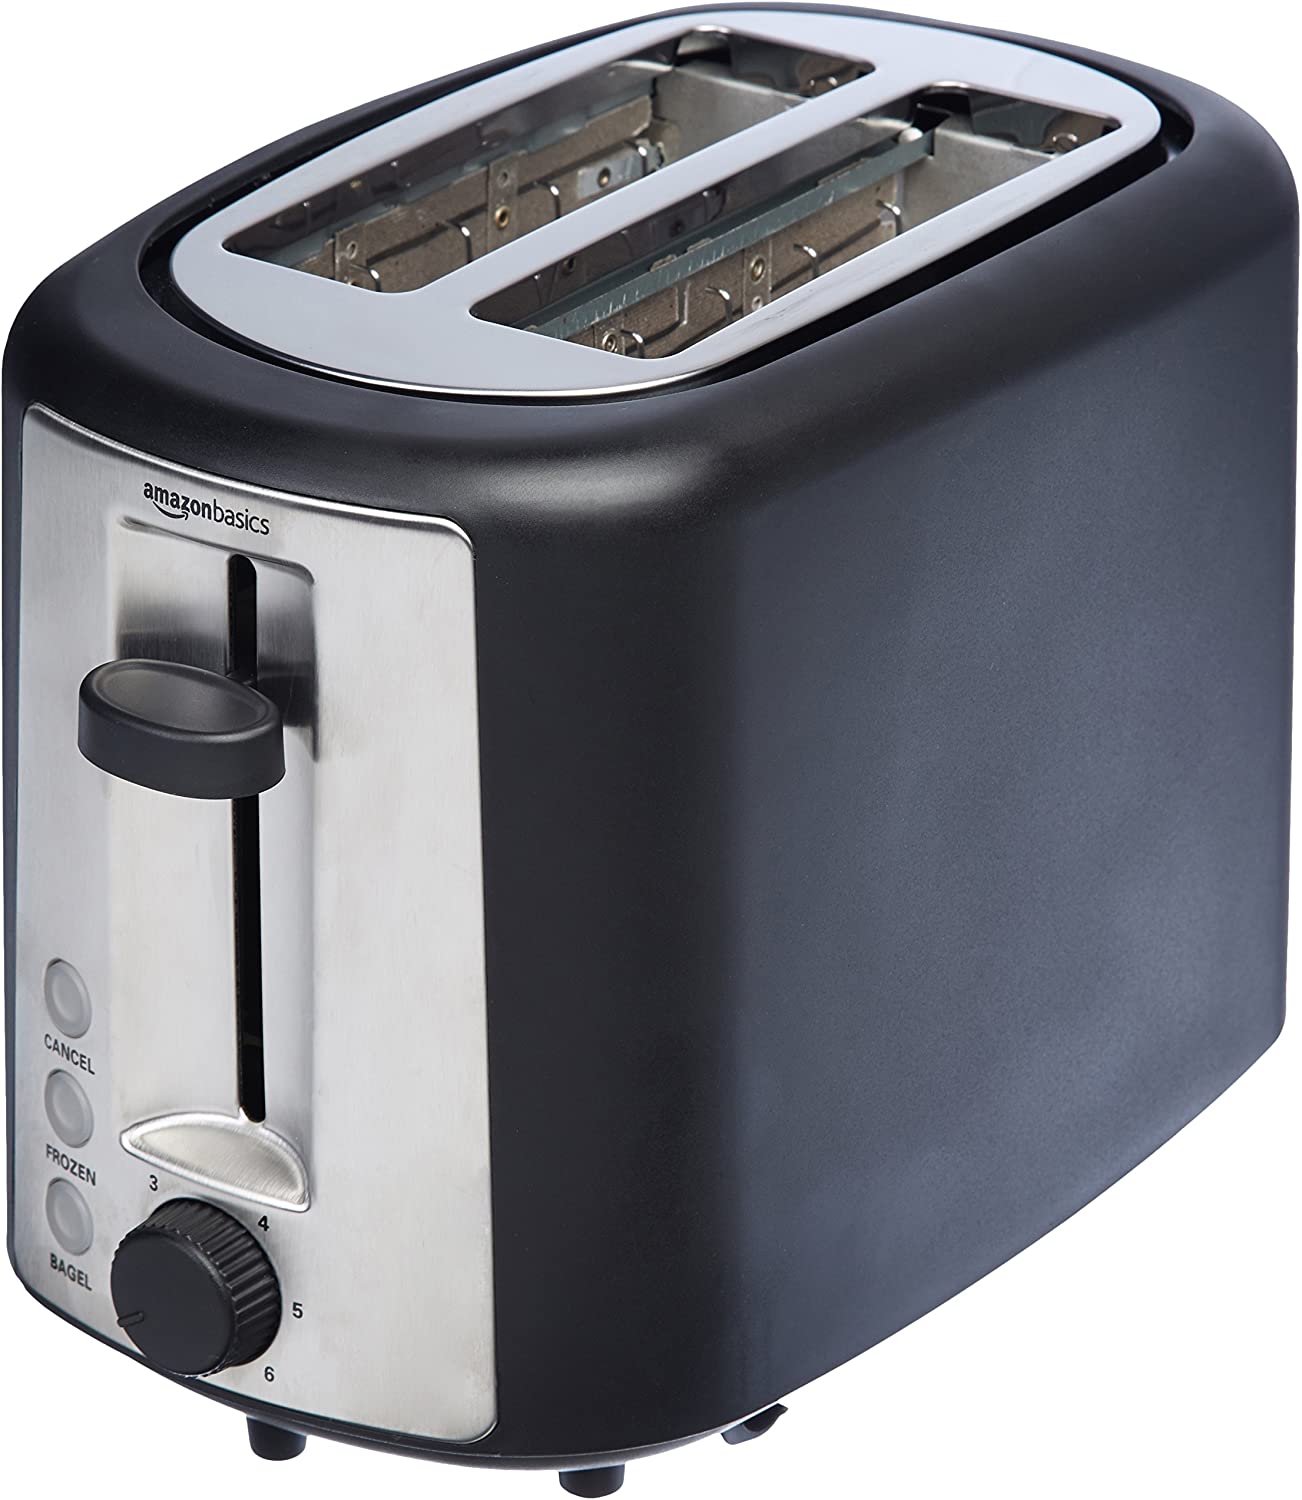 Discontinued 2 Slice Compact Plastic Toaster